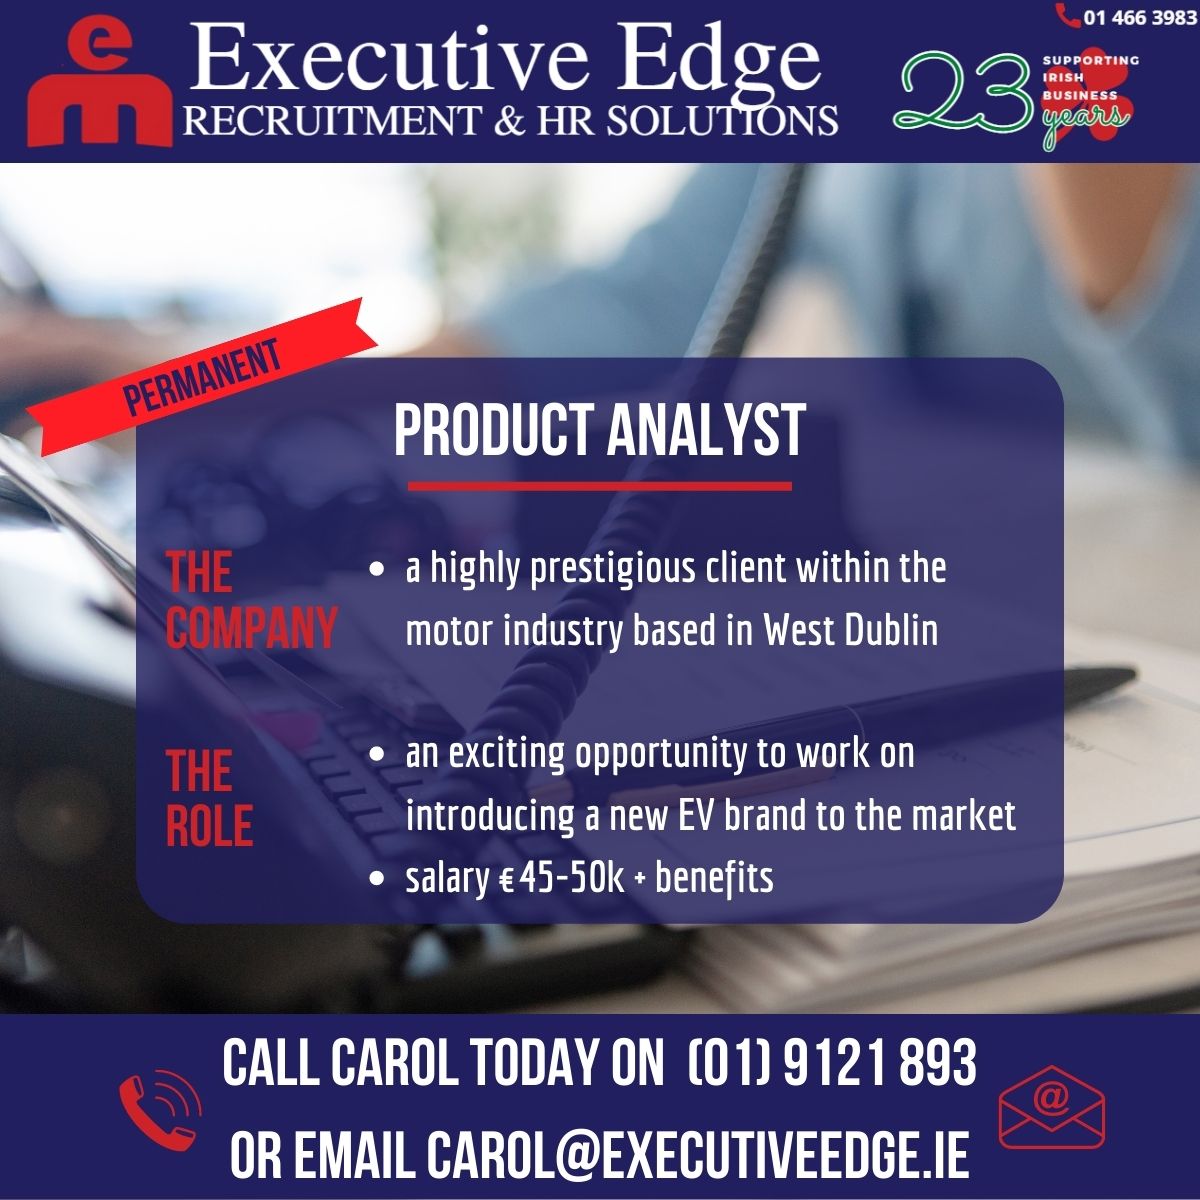 Product Analyst
Exciting new role as Product Analyst for motor industry client. Will involve being part of a team introducing new EV brand to the Irish market.
Contact Carol today 01 9121893
Find out more:executiveedge.ie/job/128167/
#DublinJobs #ProductAnalyst
executiveedge.ie/job/128167/